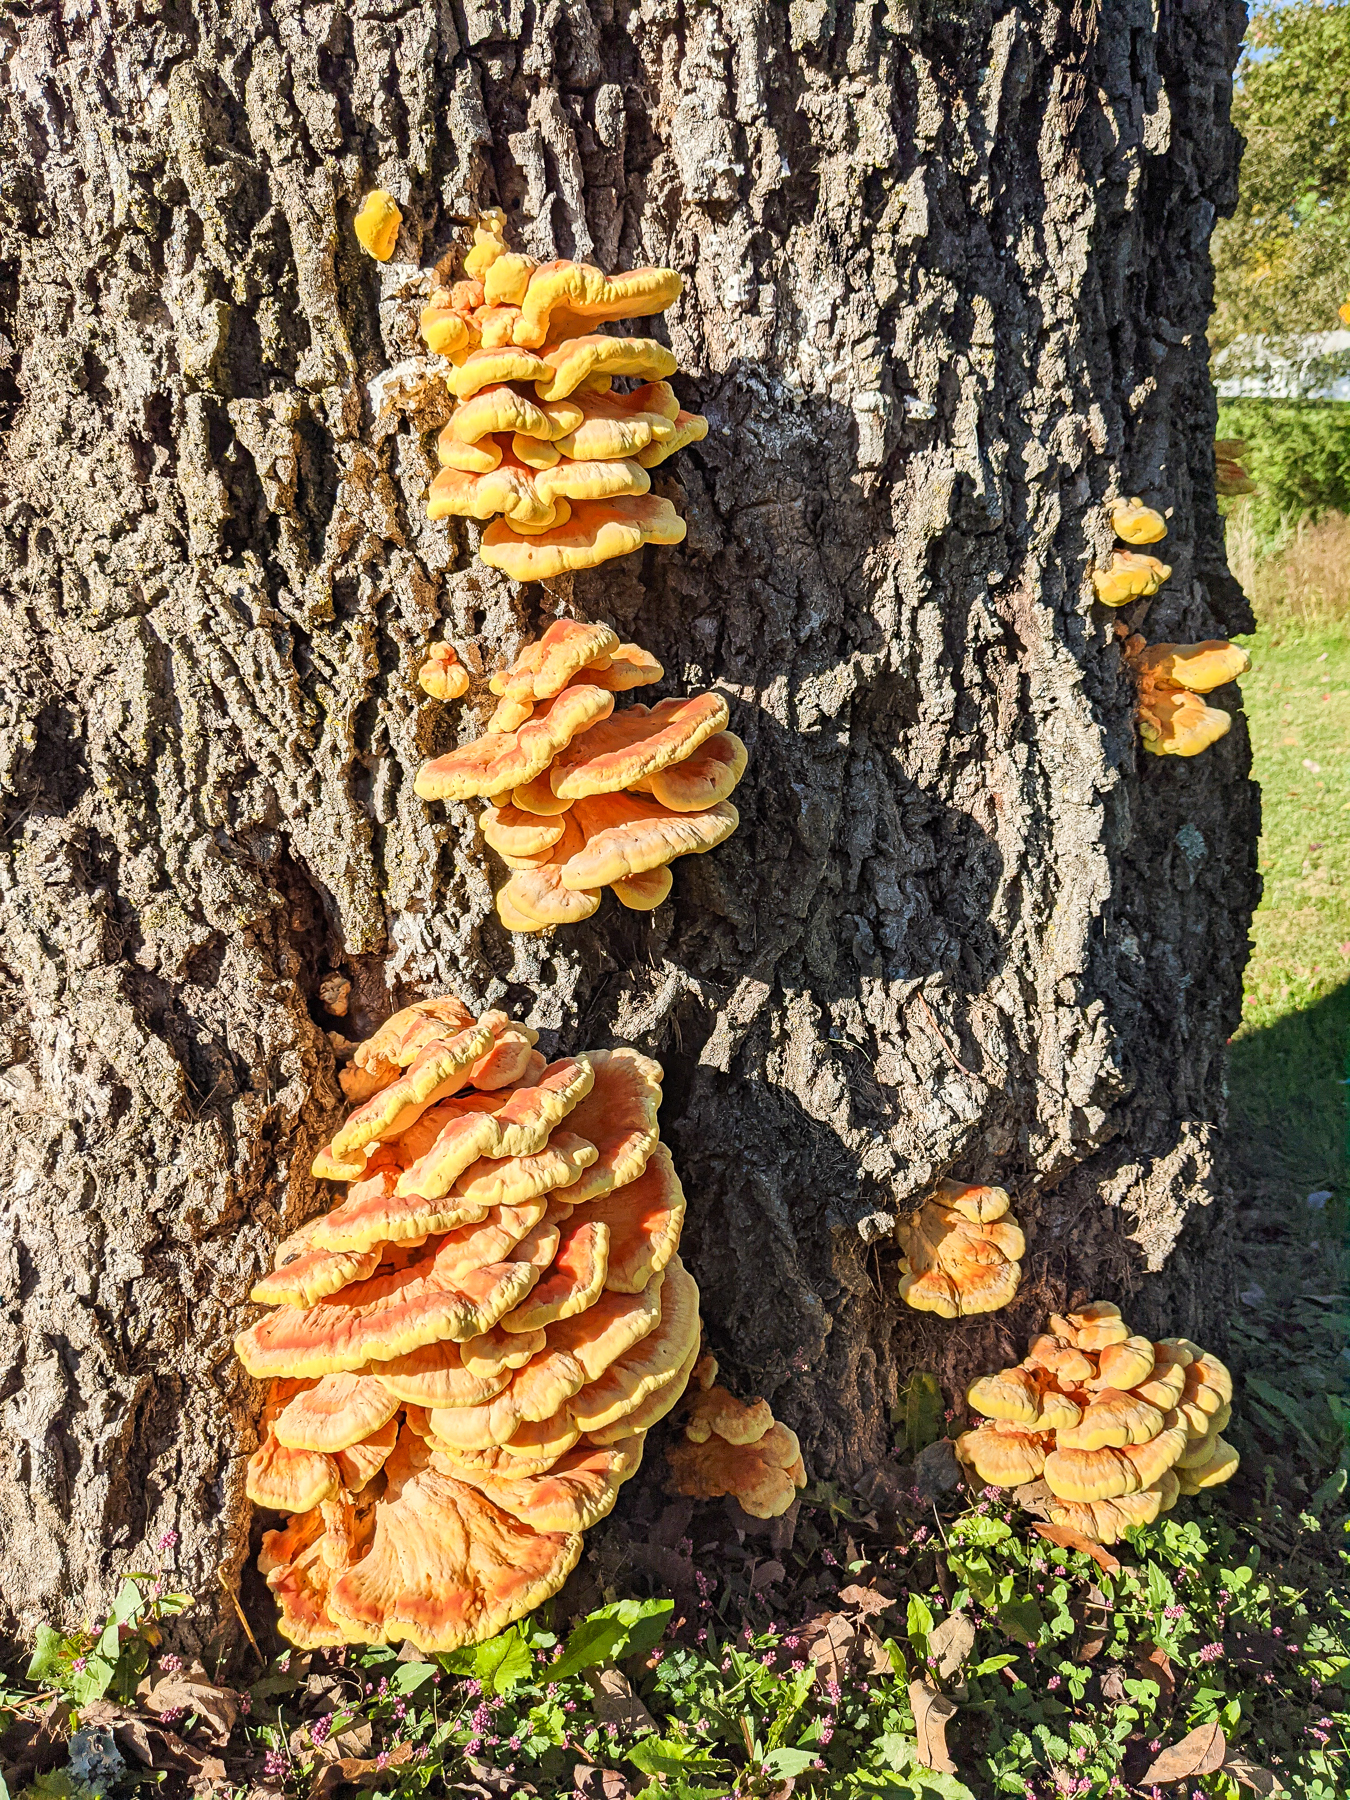 Chicken of the woods mushrooms growing on a tree